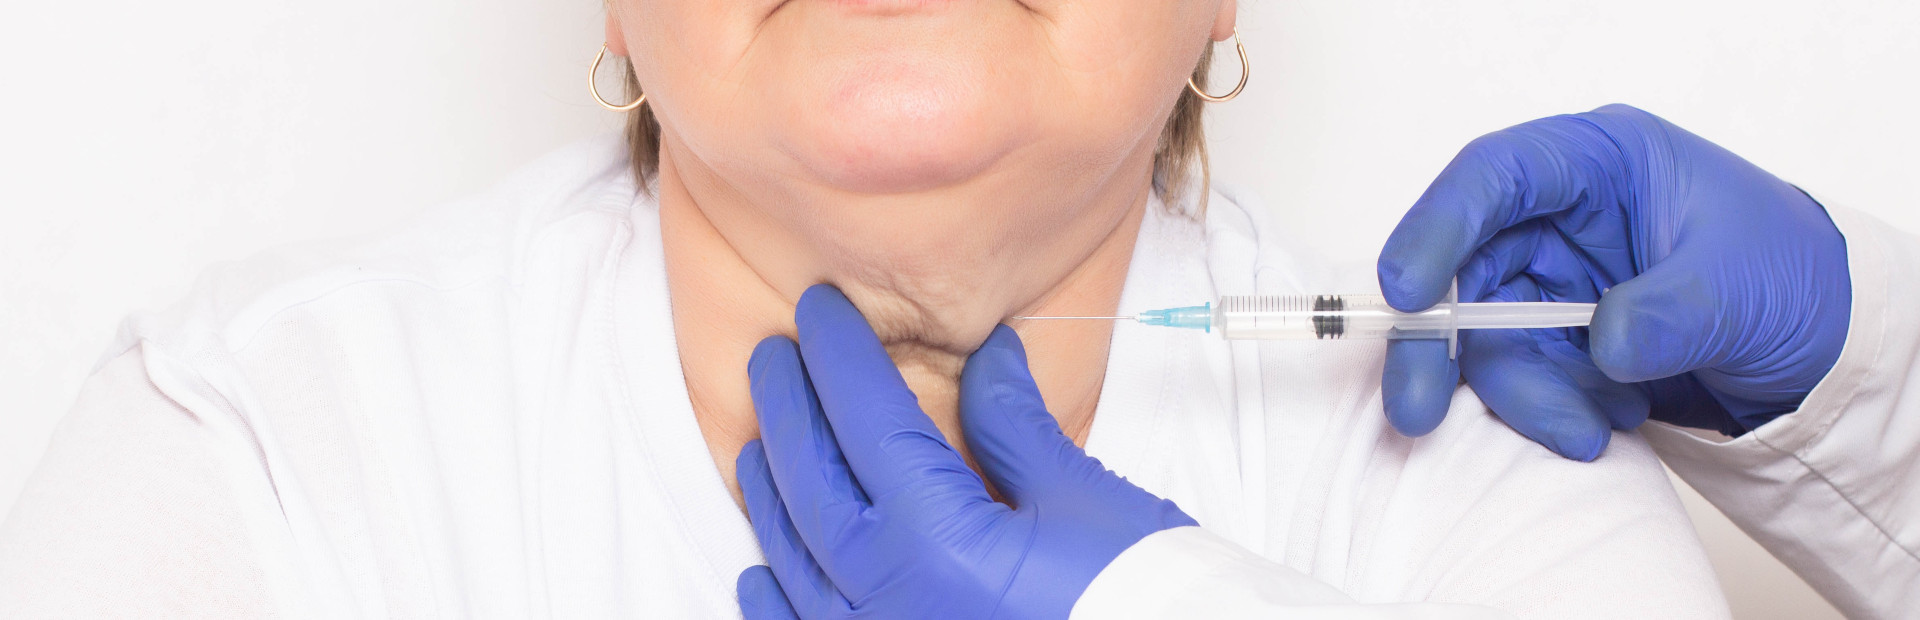 Injecting medicine in to the neck